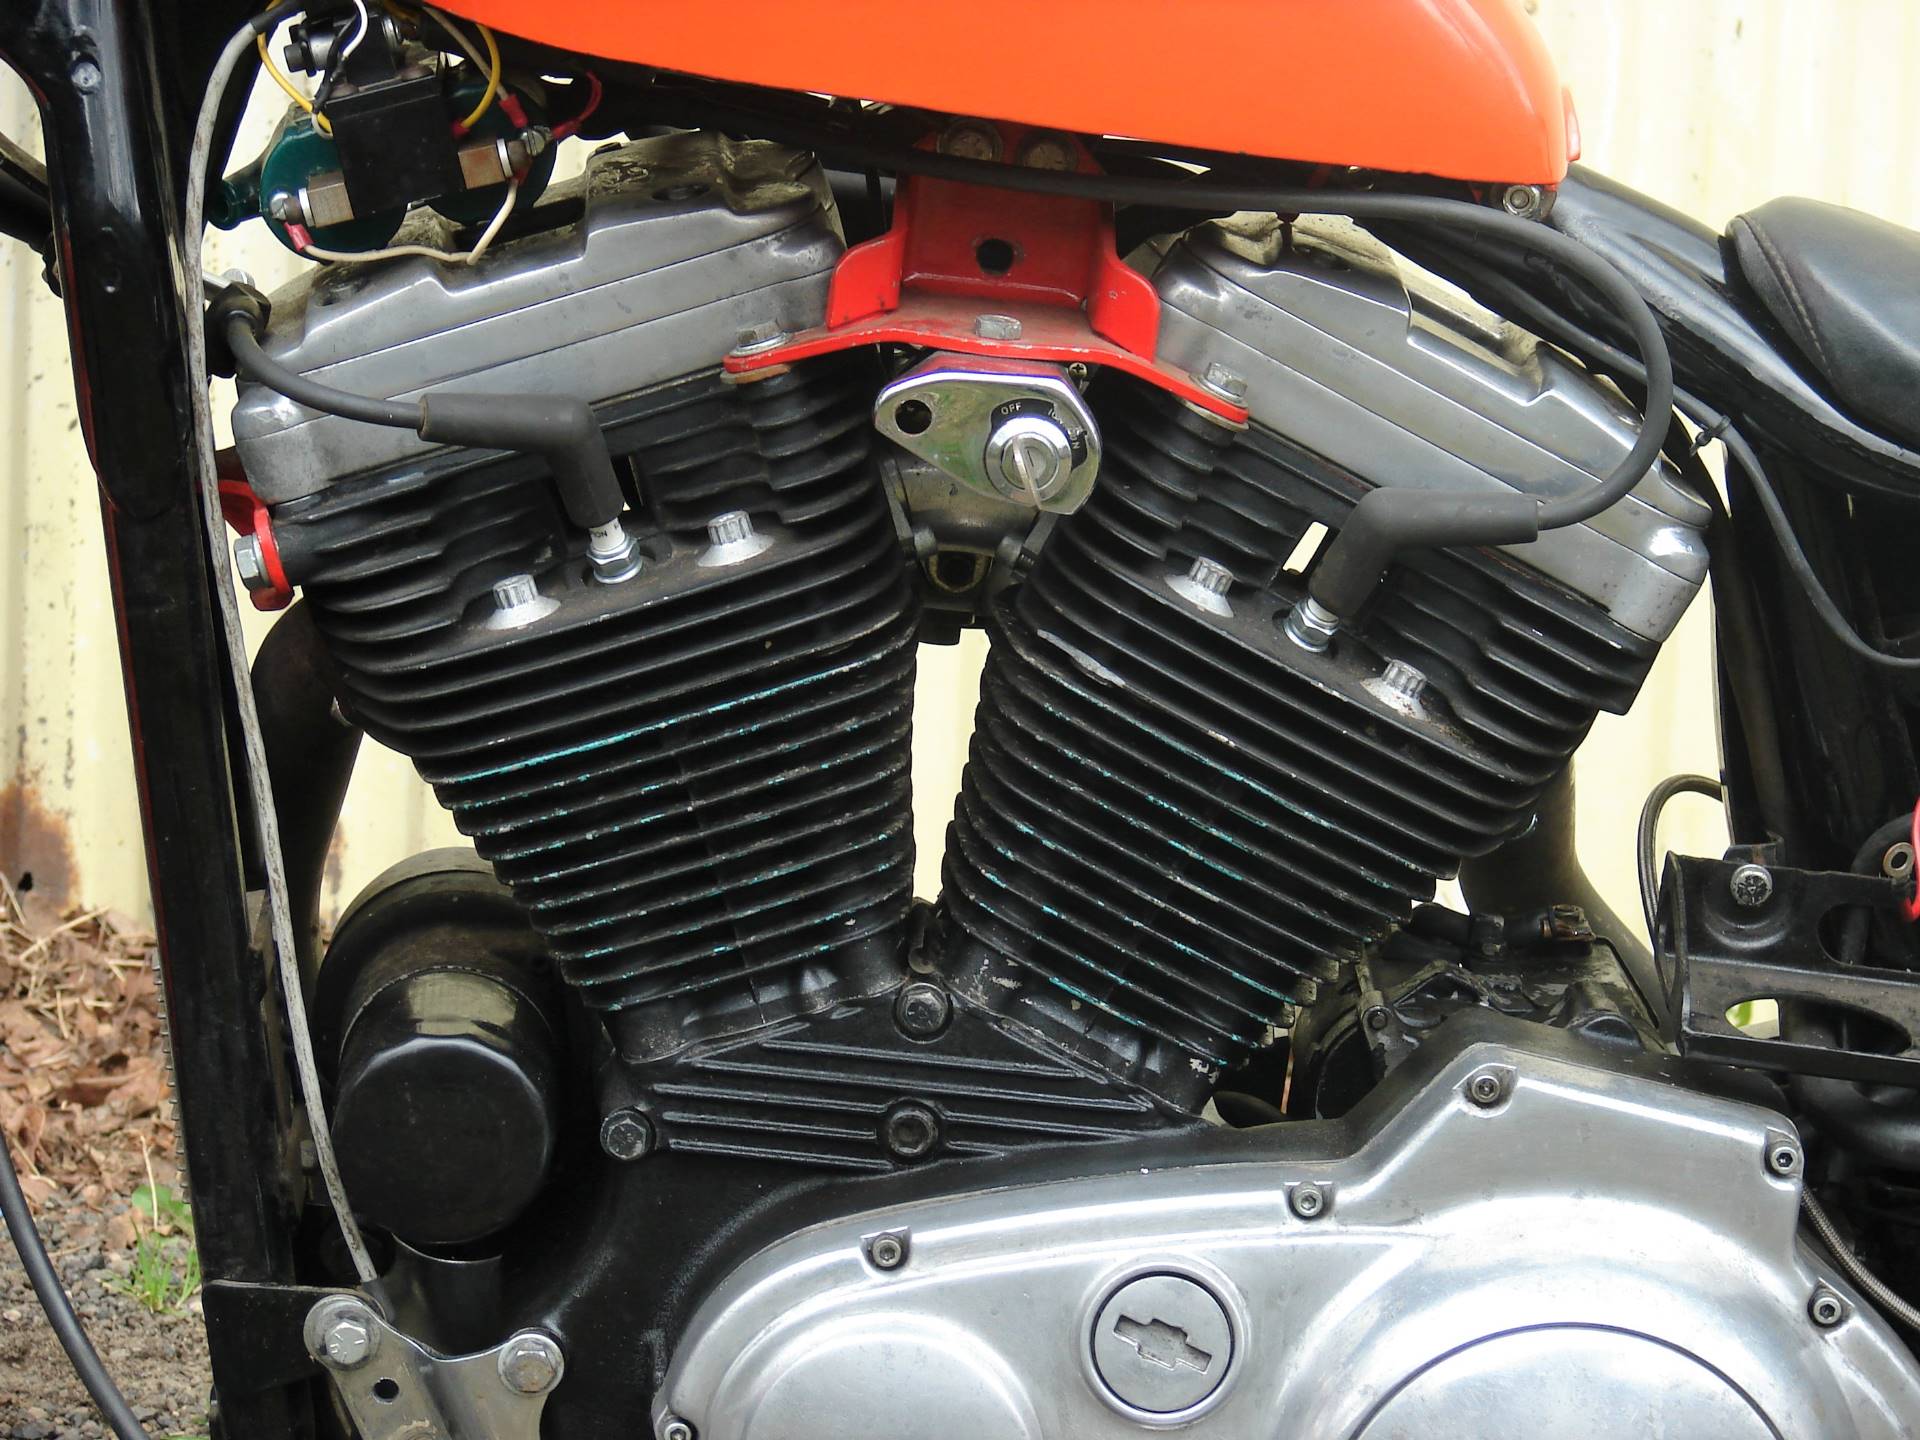 1988 Harley-Davidson 1200 XL Sportster (Modified) - Racing / Drag Bike! in Williamstown, New Jersey - Photo 18